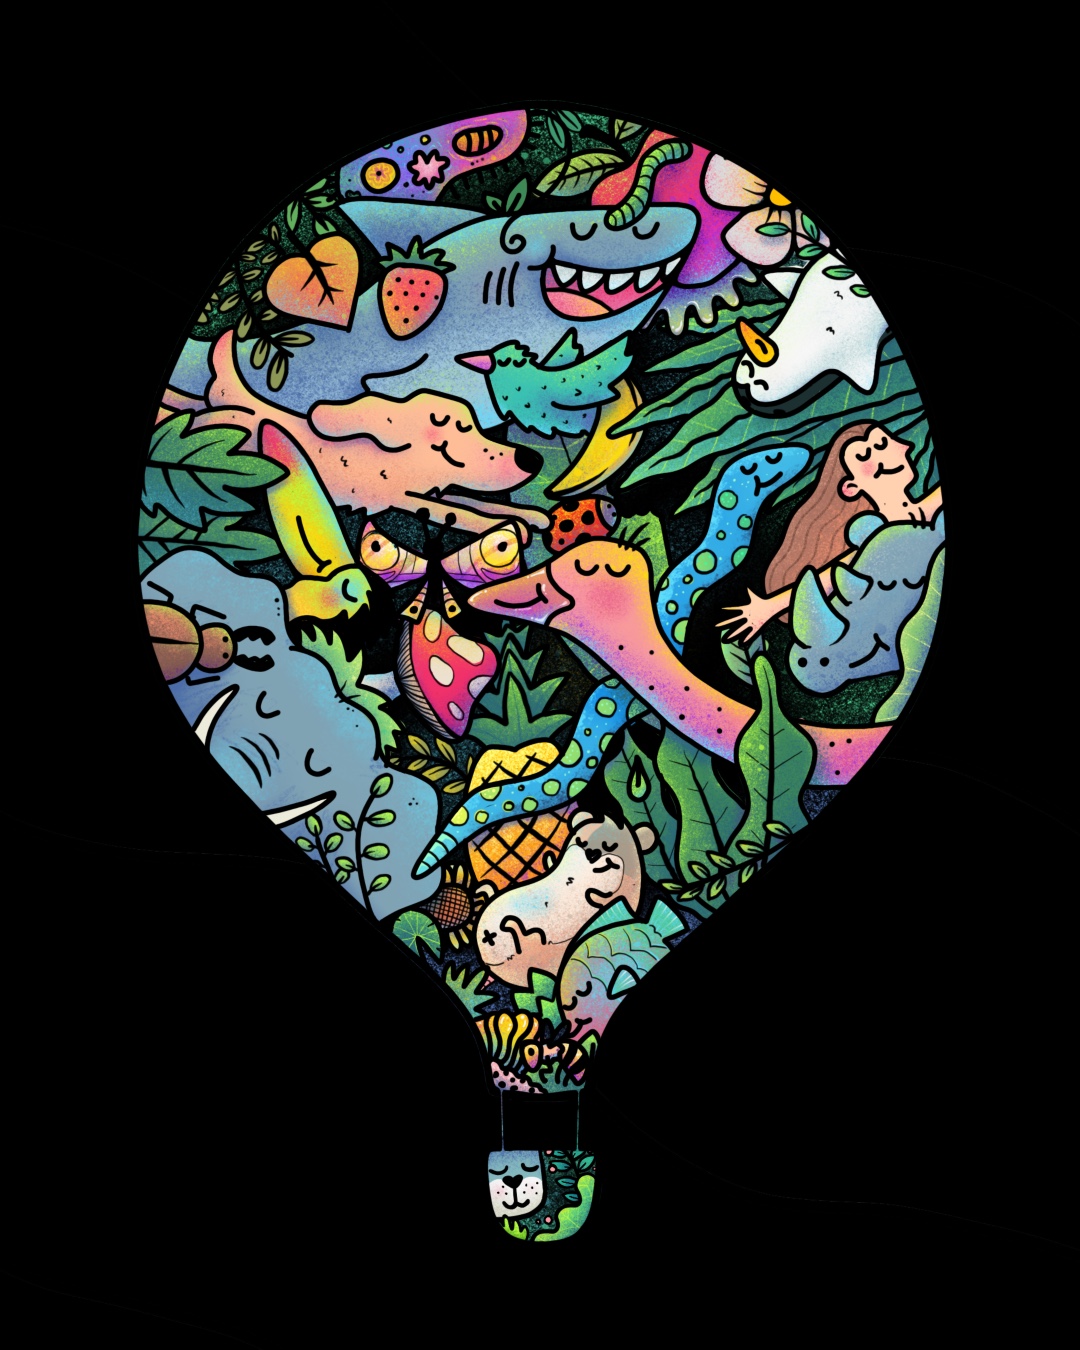 Balloon of life, animals, and nature.